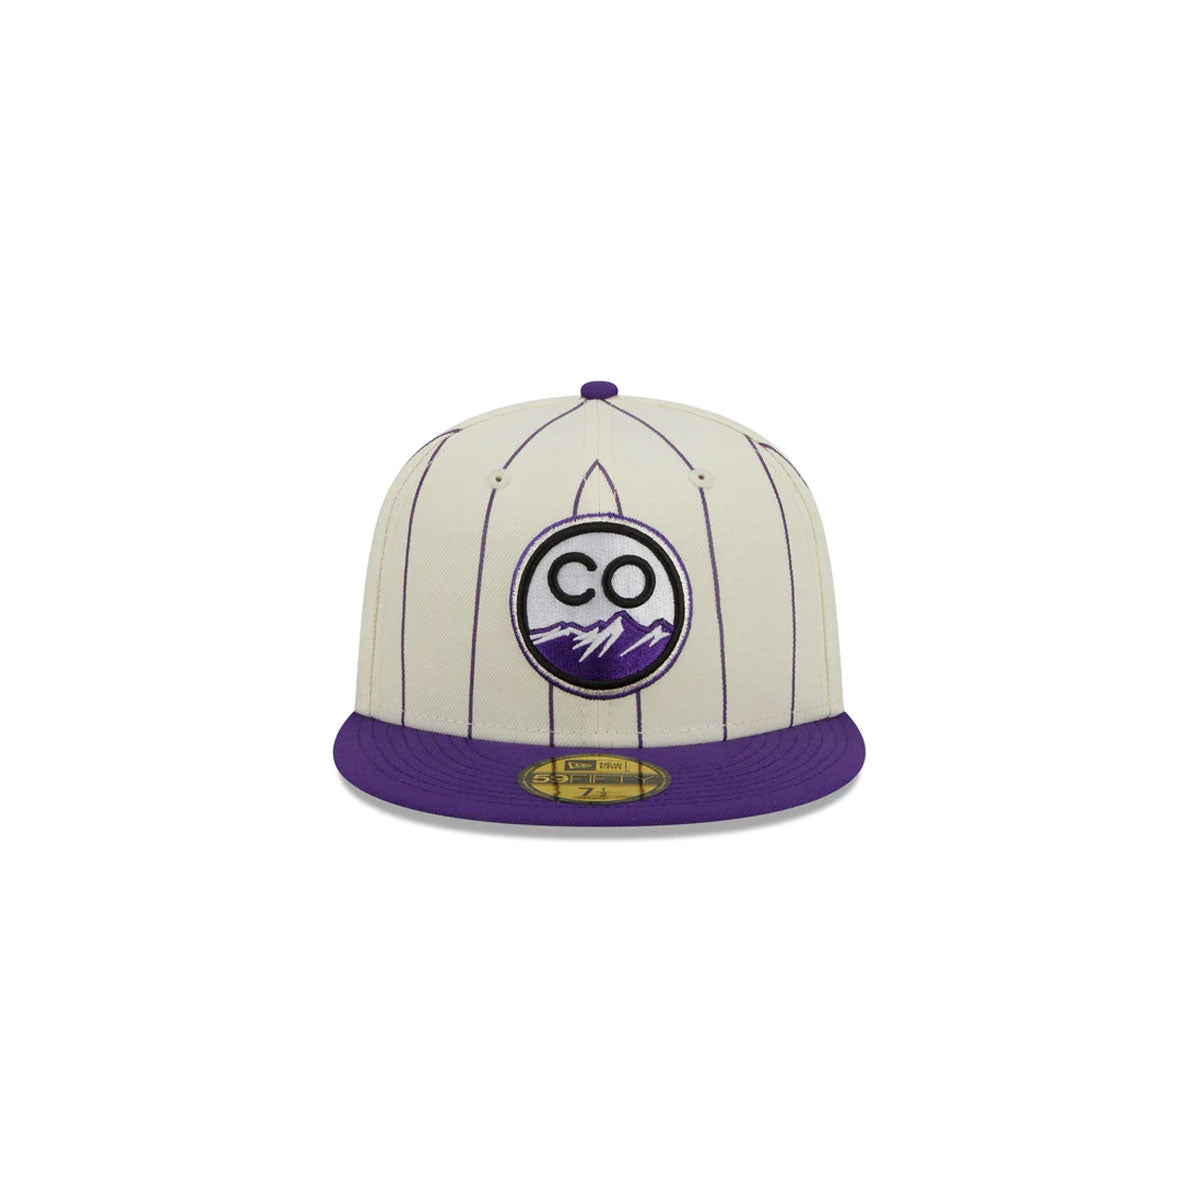 Retro City Colorado Rockies 59FIFTY Fitted